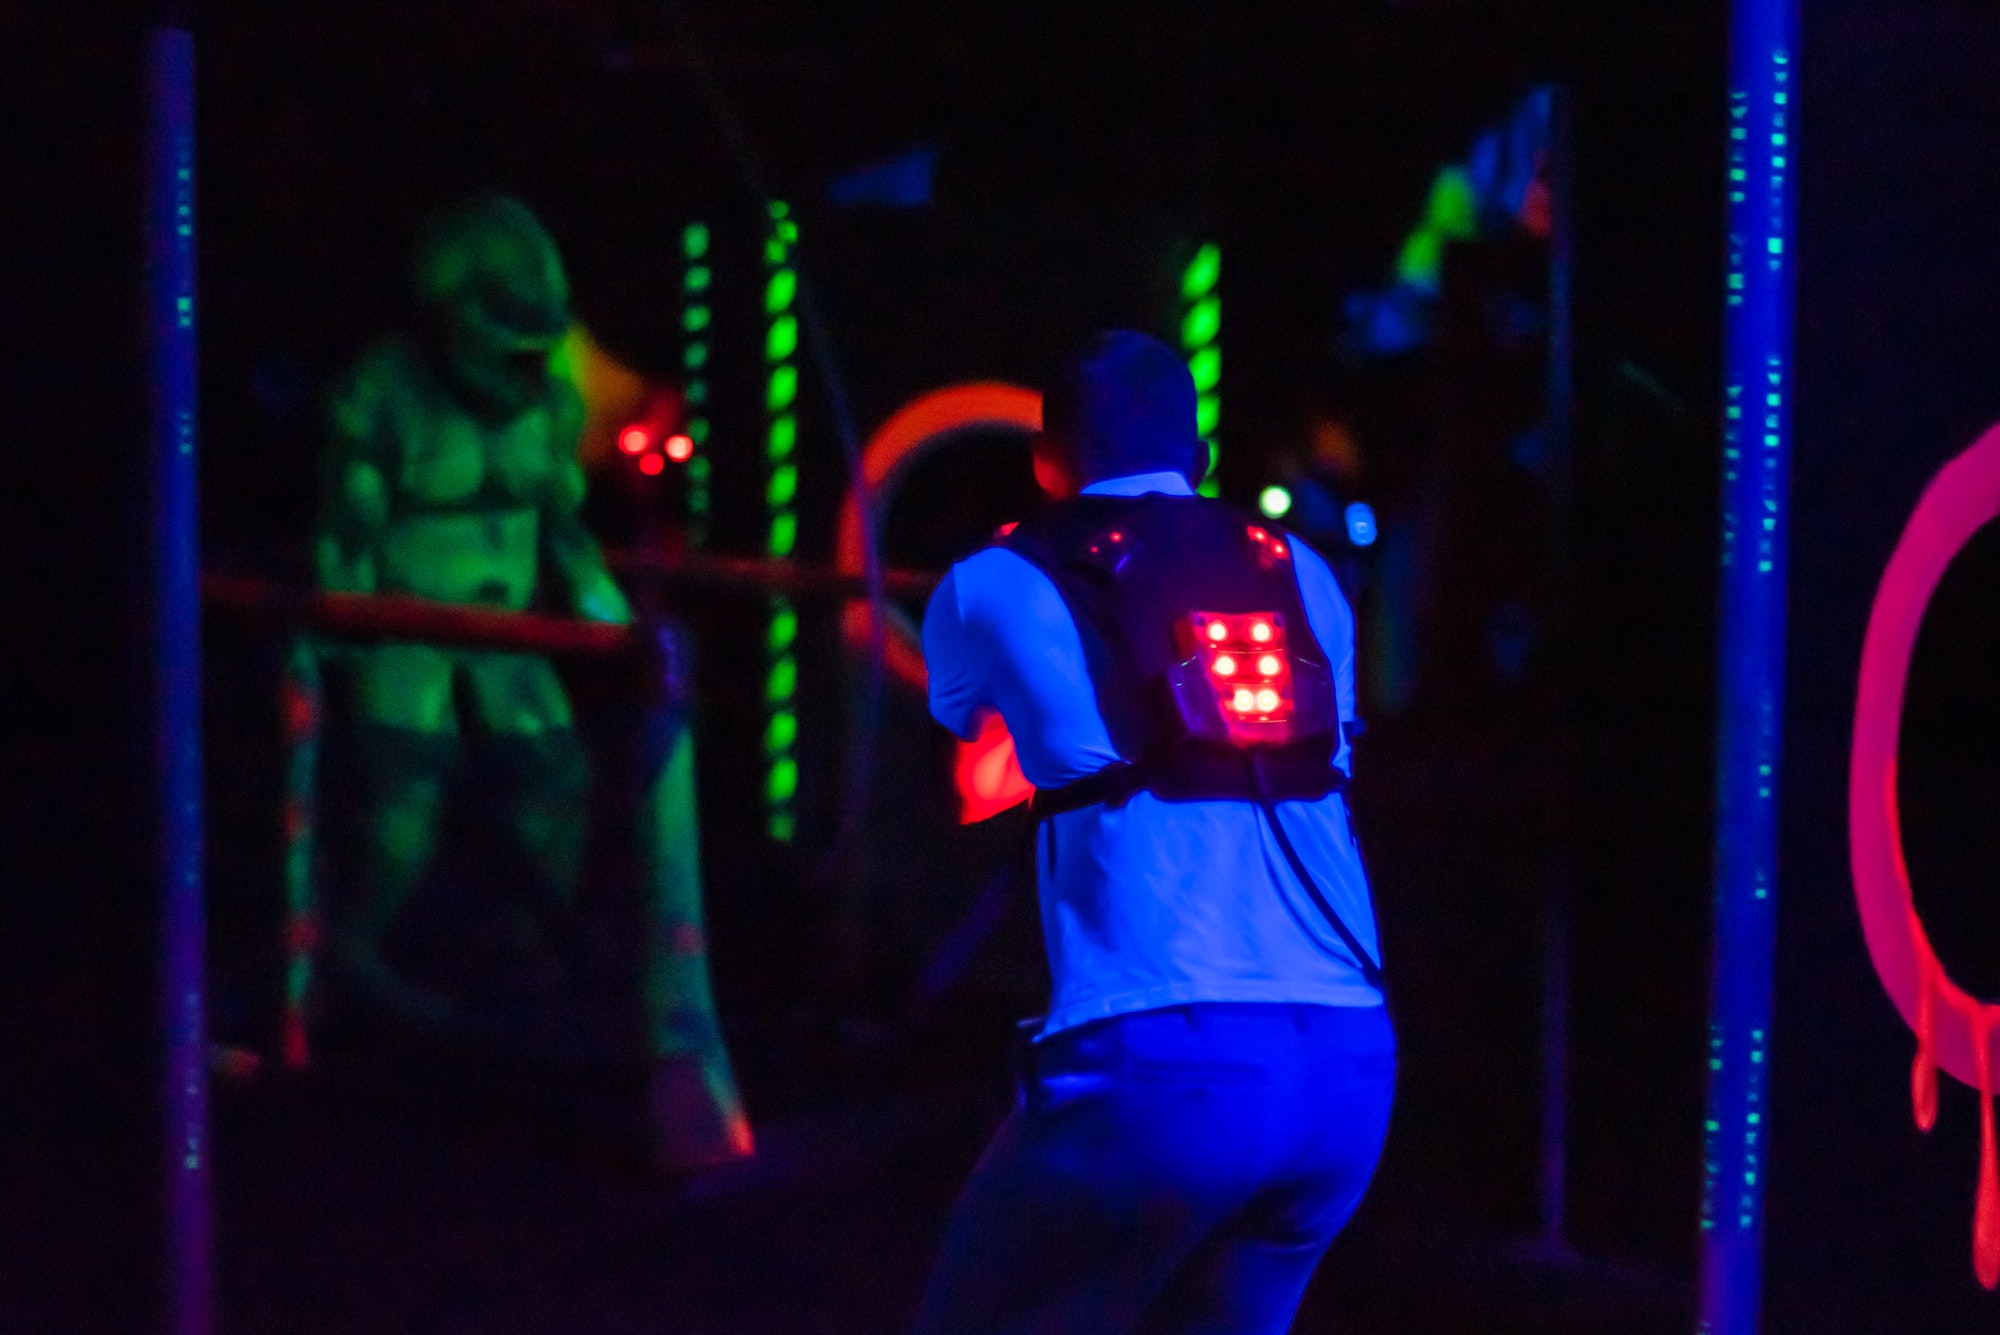 Laser tag recreational leisure activity